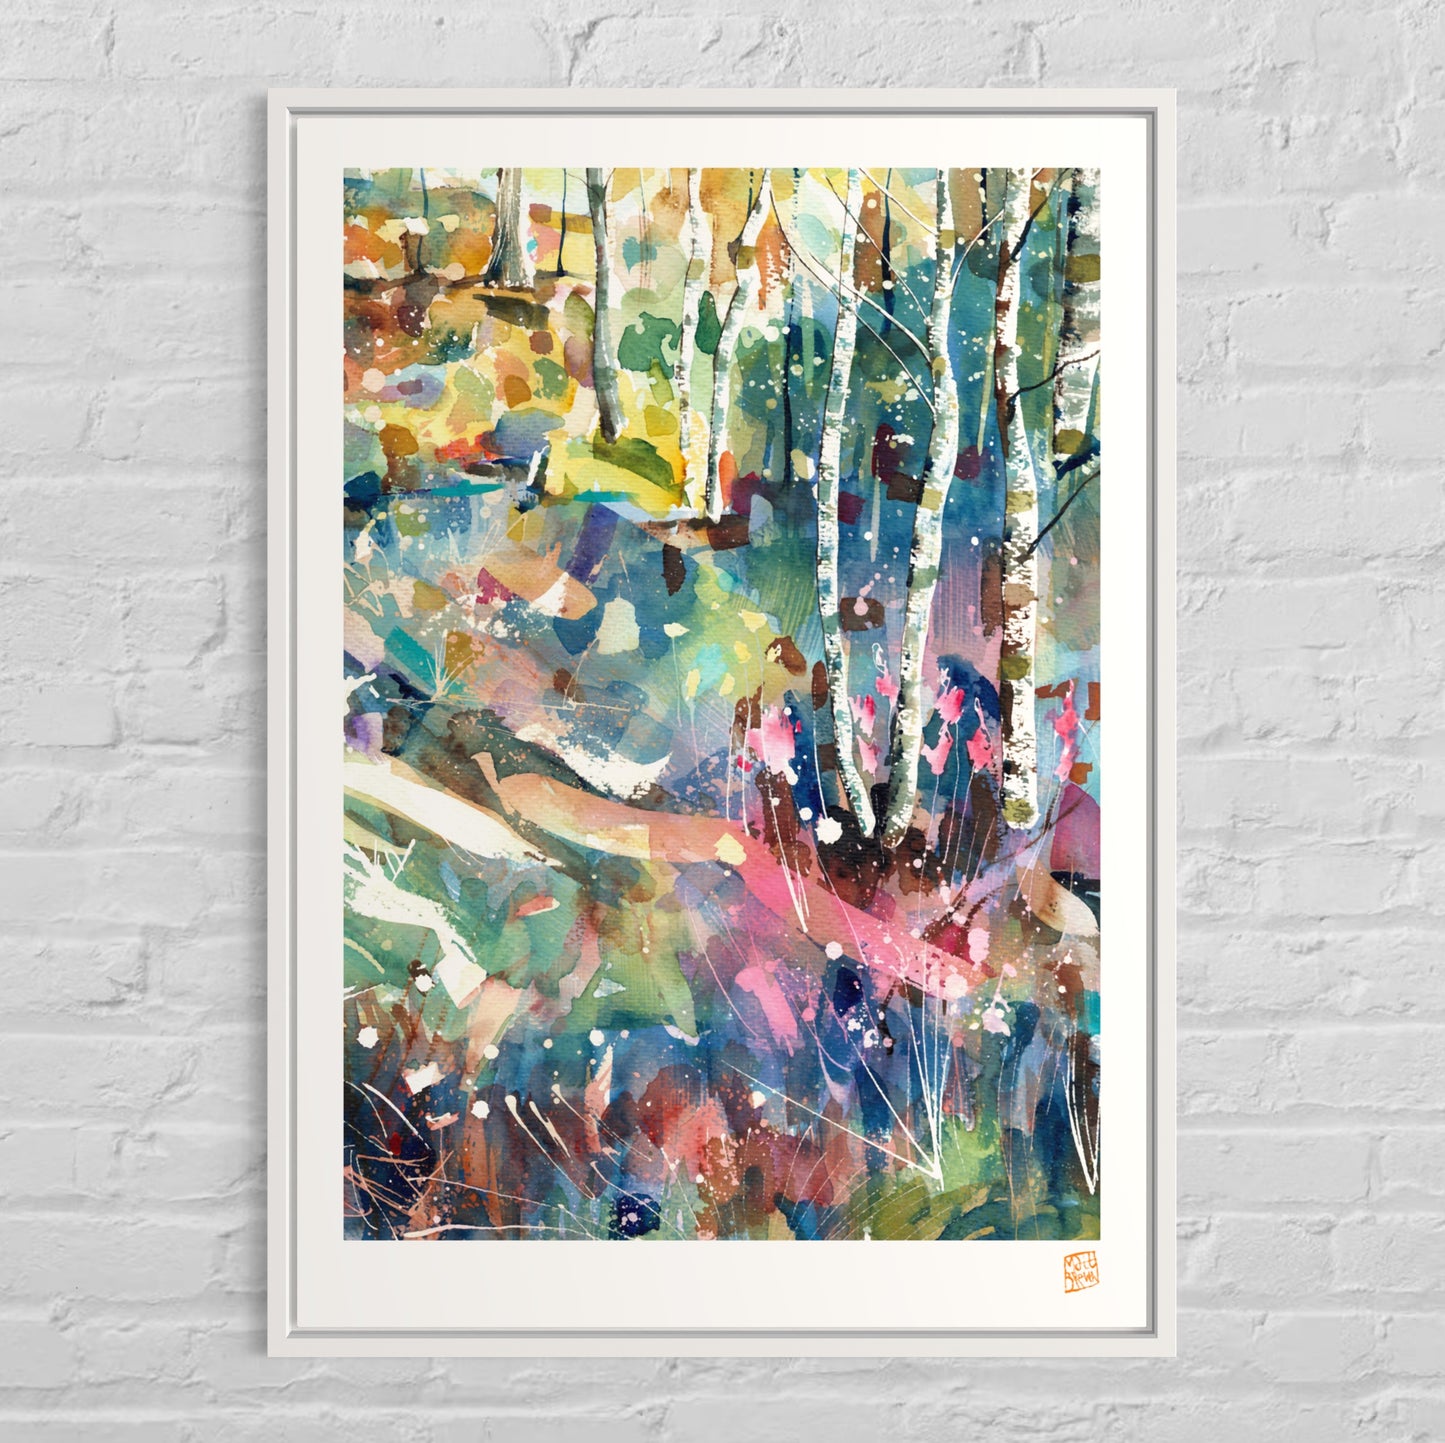 New A1 | A2 Limited Edition Print - Warming the Winter Out